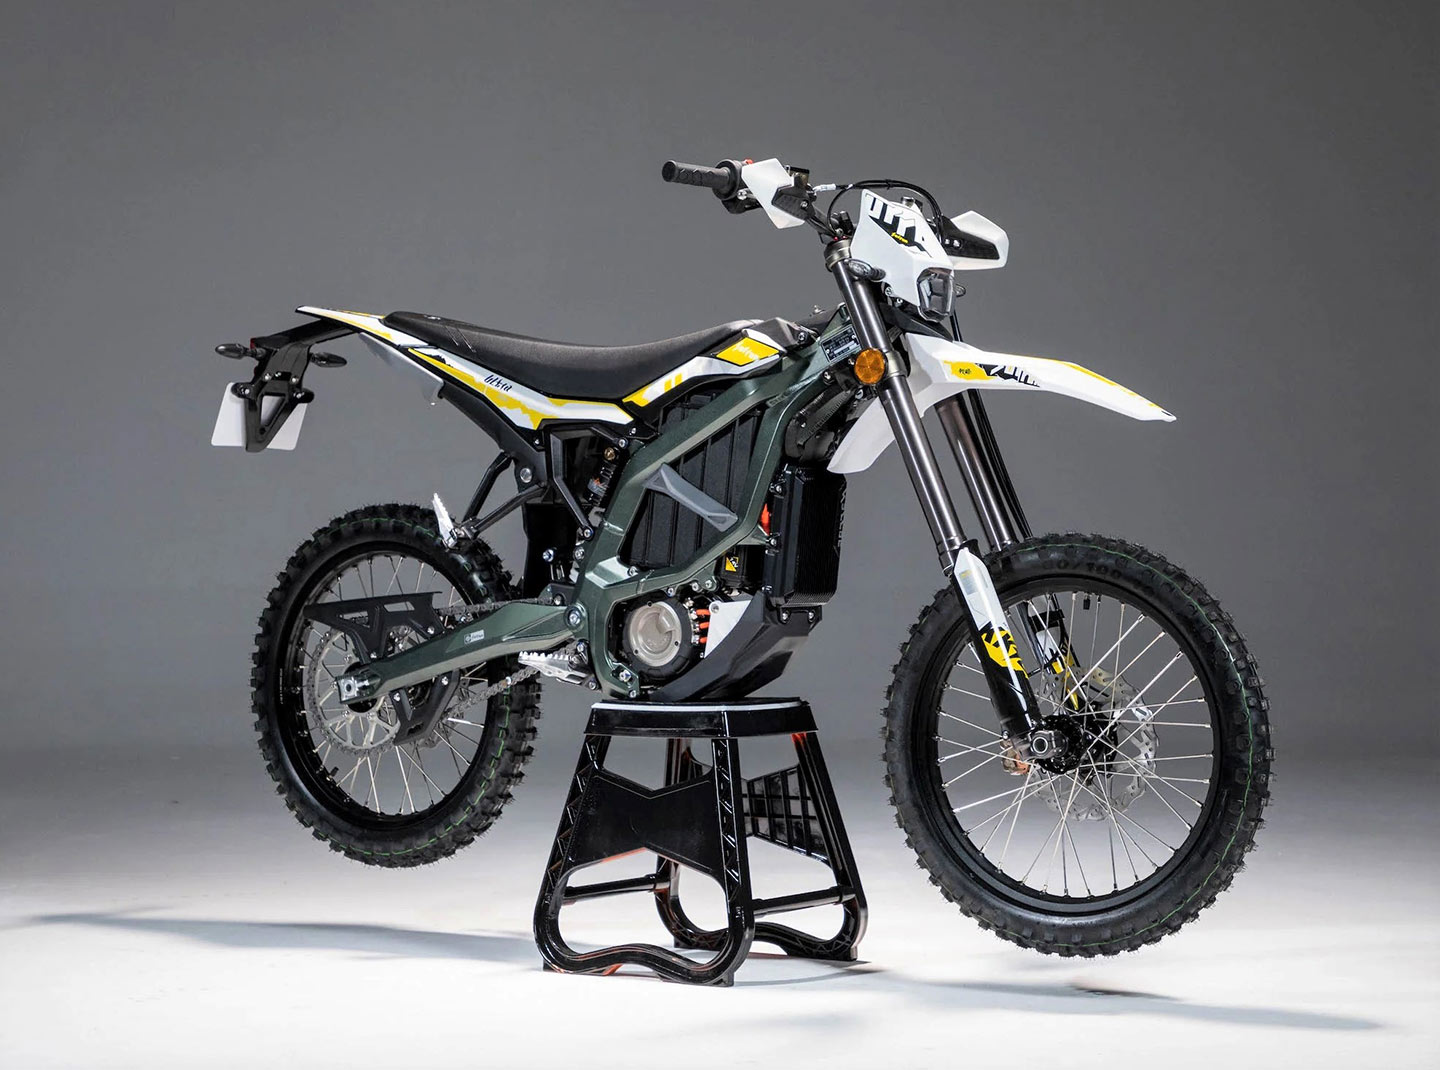 Sur-Ron Ultra Bee Super Moto or £5,000